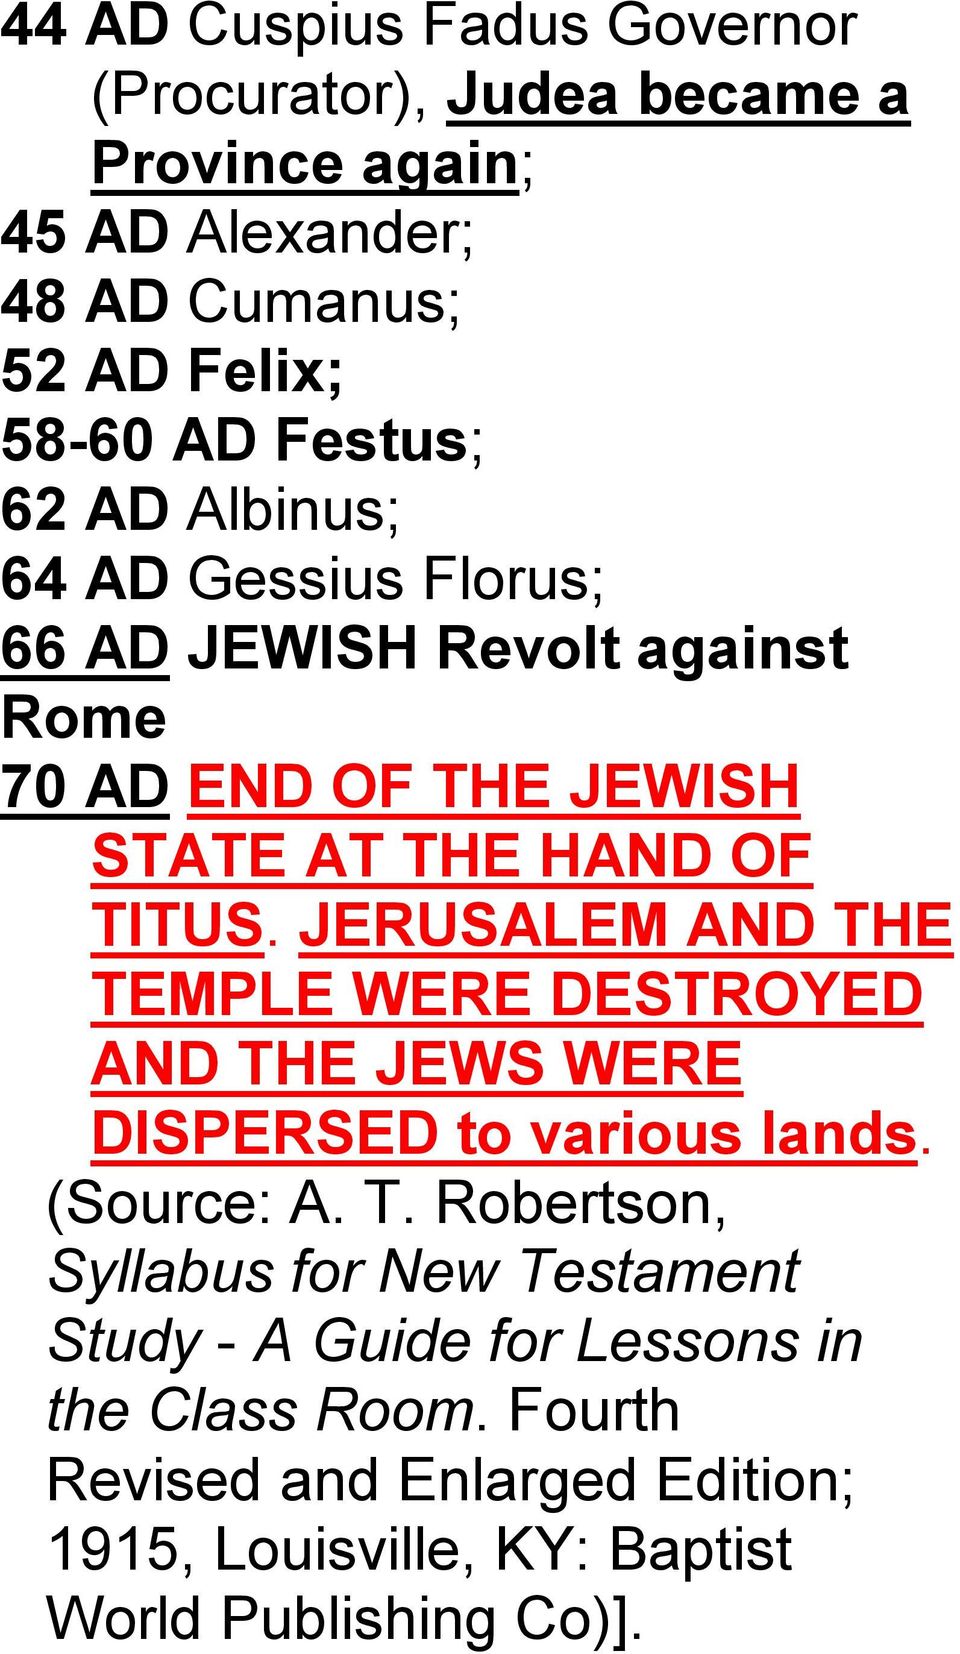 JERUSALEM AND THE TEMPLE WERE DESTROYED AND THE JEWS WERE DISPERSED to various lands. (Source: A. T. Robertson, Syllabus for New Testament Study - A Guide for Lessons in the Class Room.